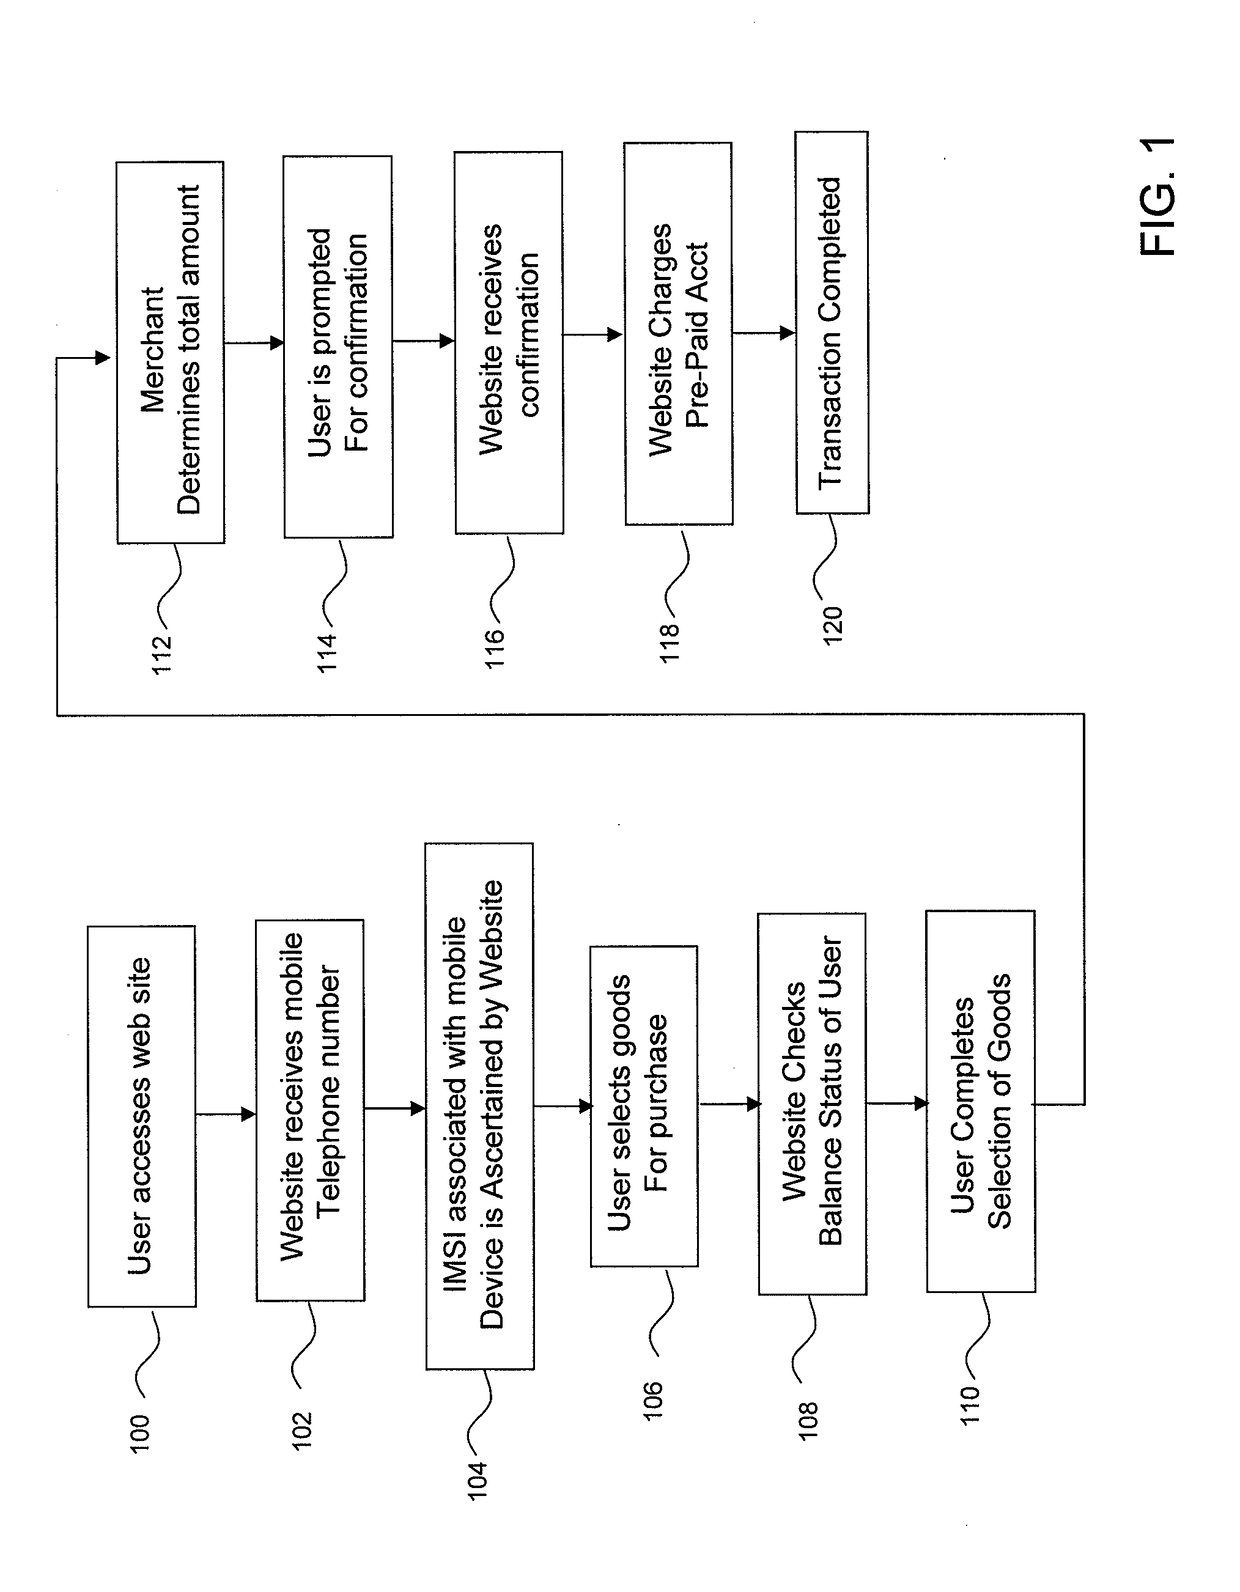 Payment gateway for processing payment requests associated with a wireless users account